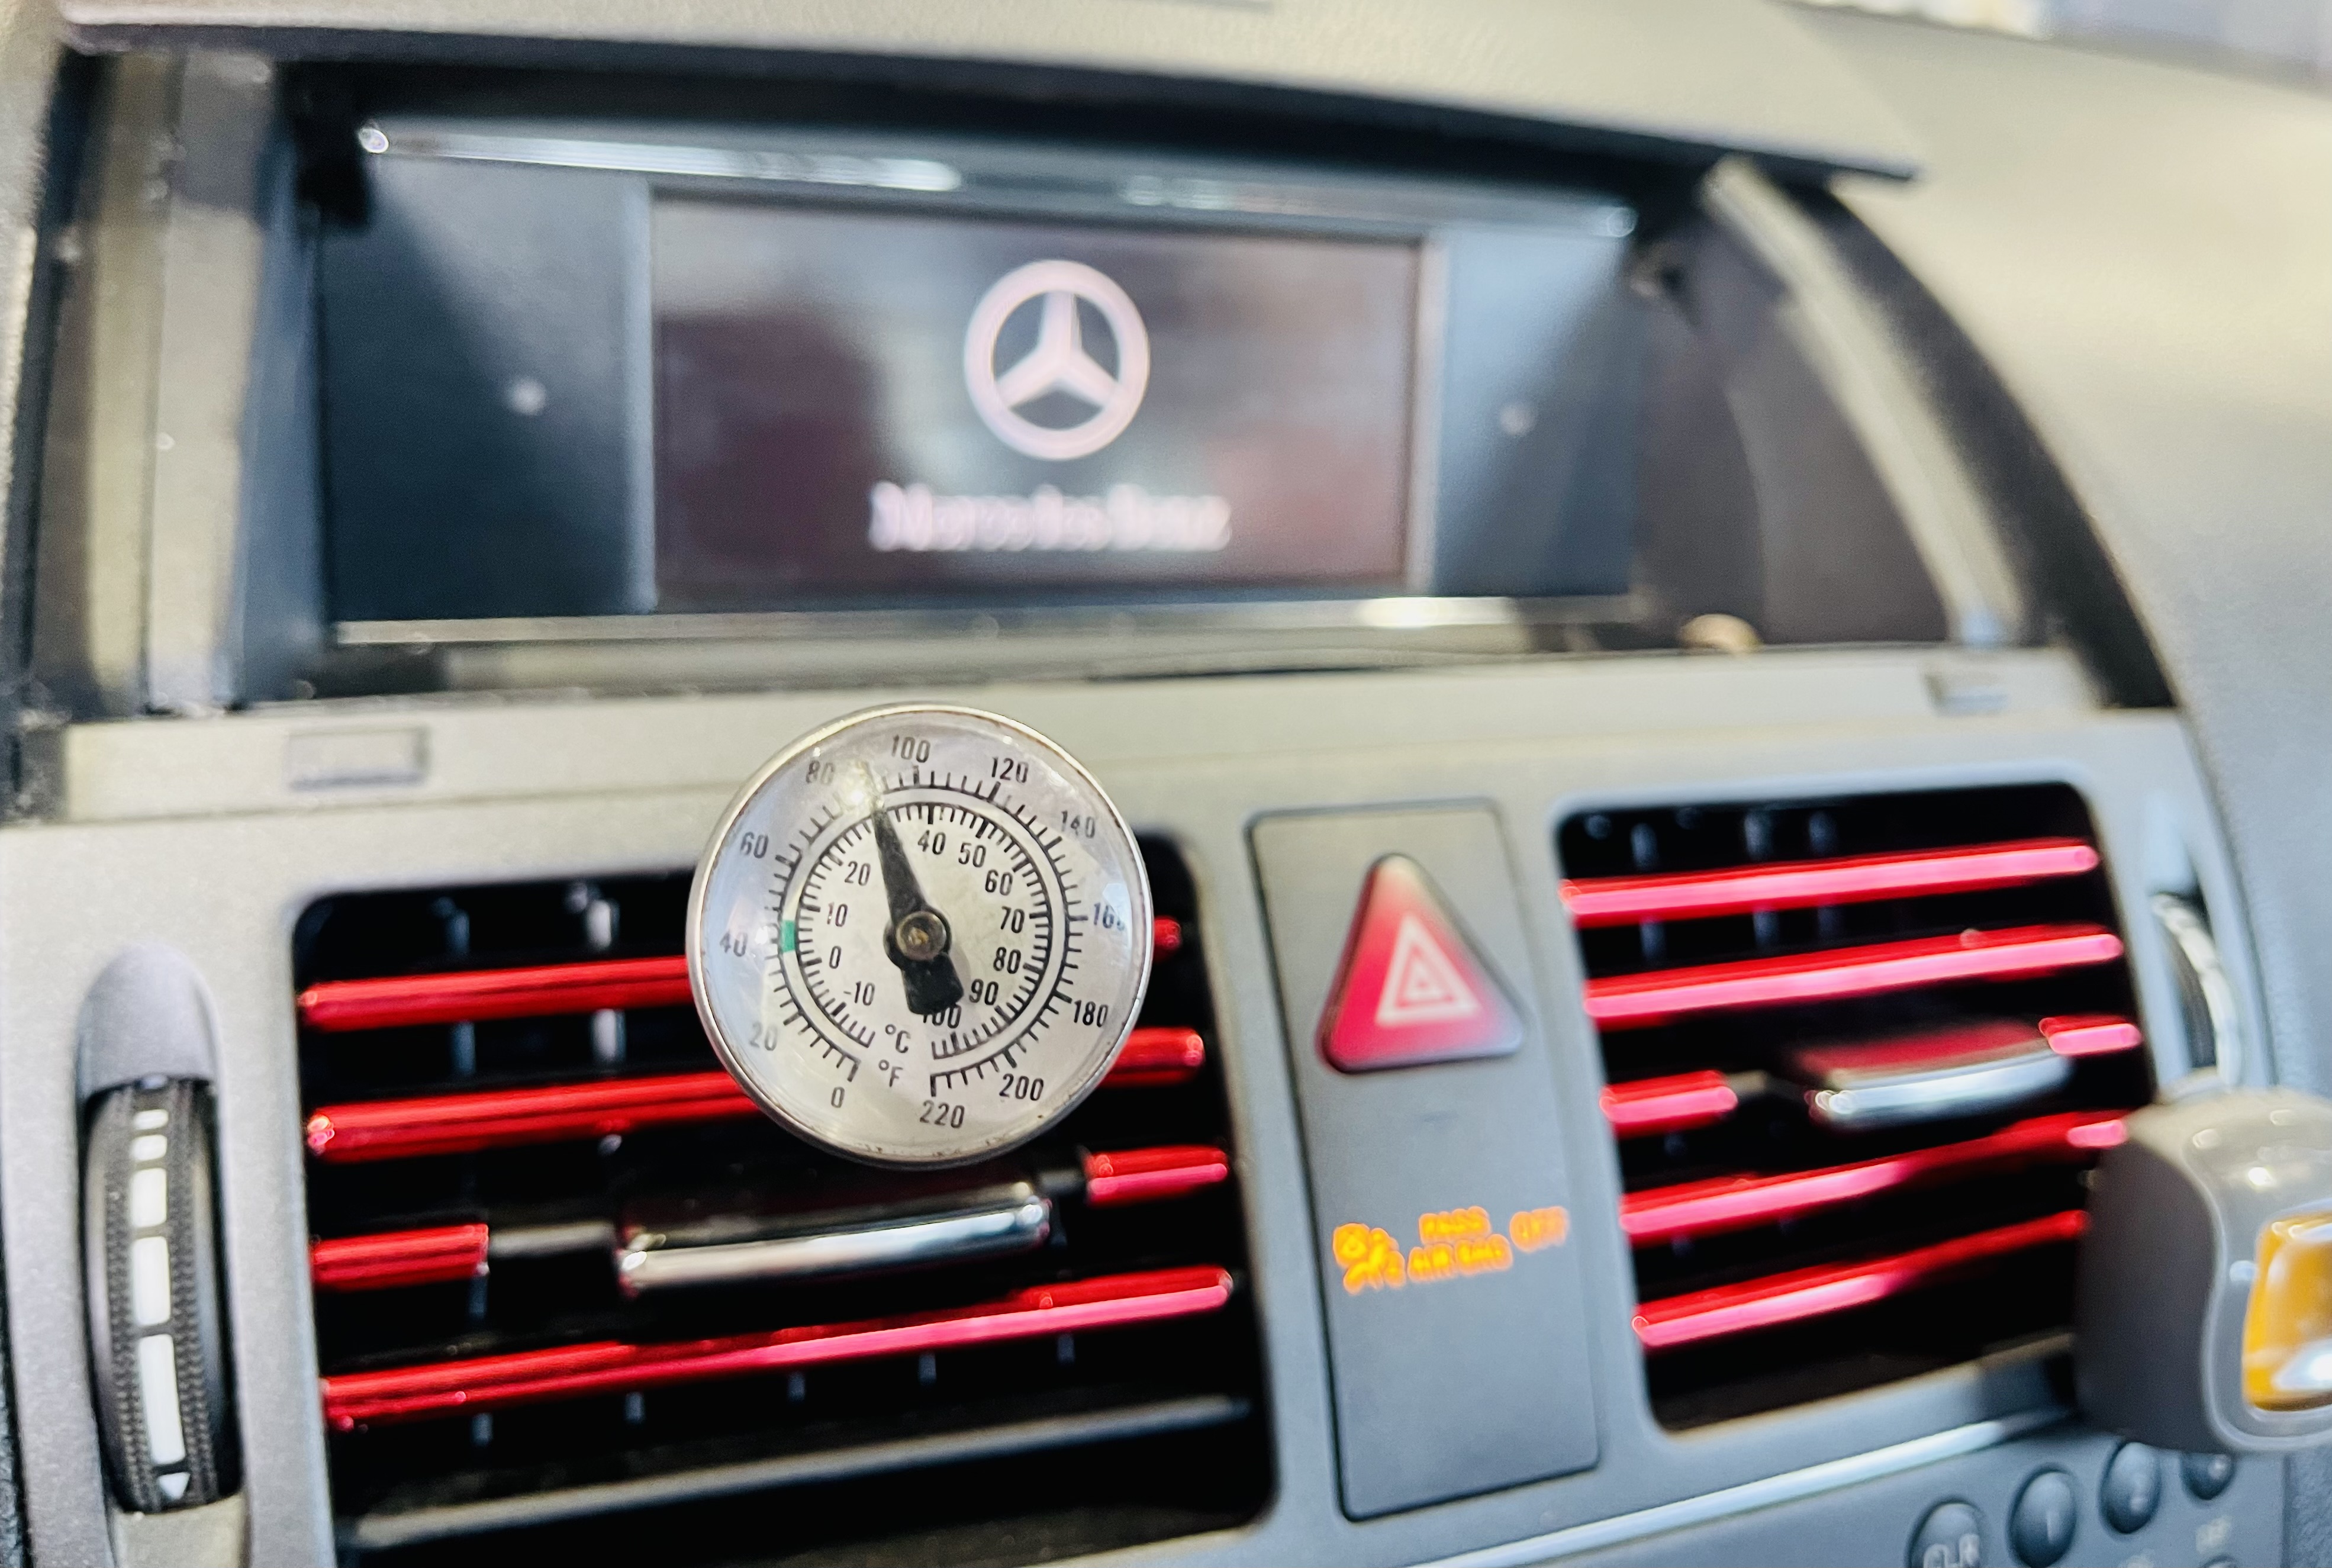 The Ultimate Guide to Understanding Your Car's A/C System